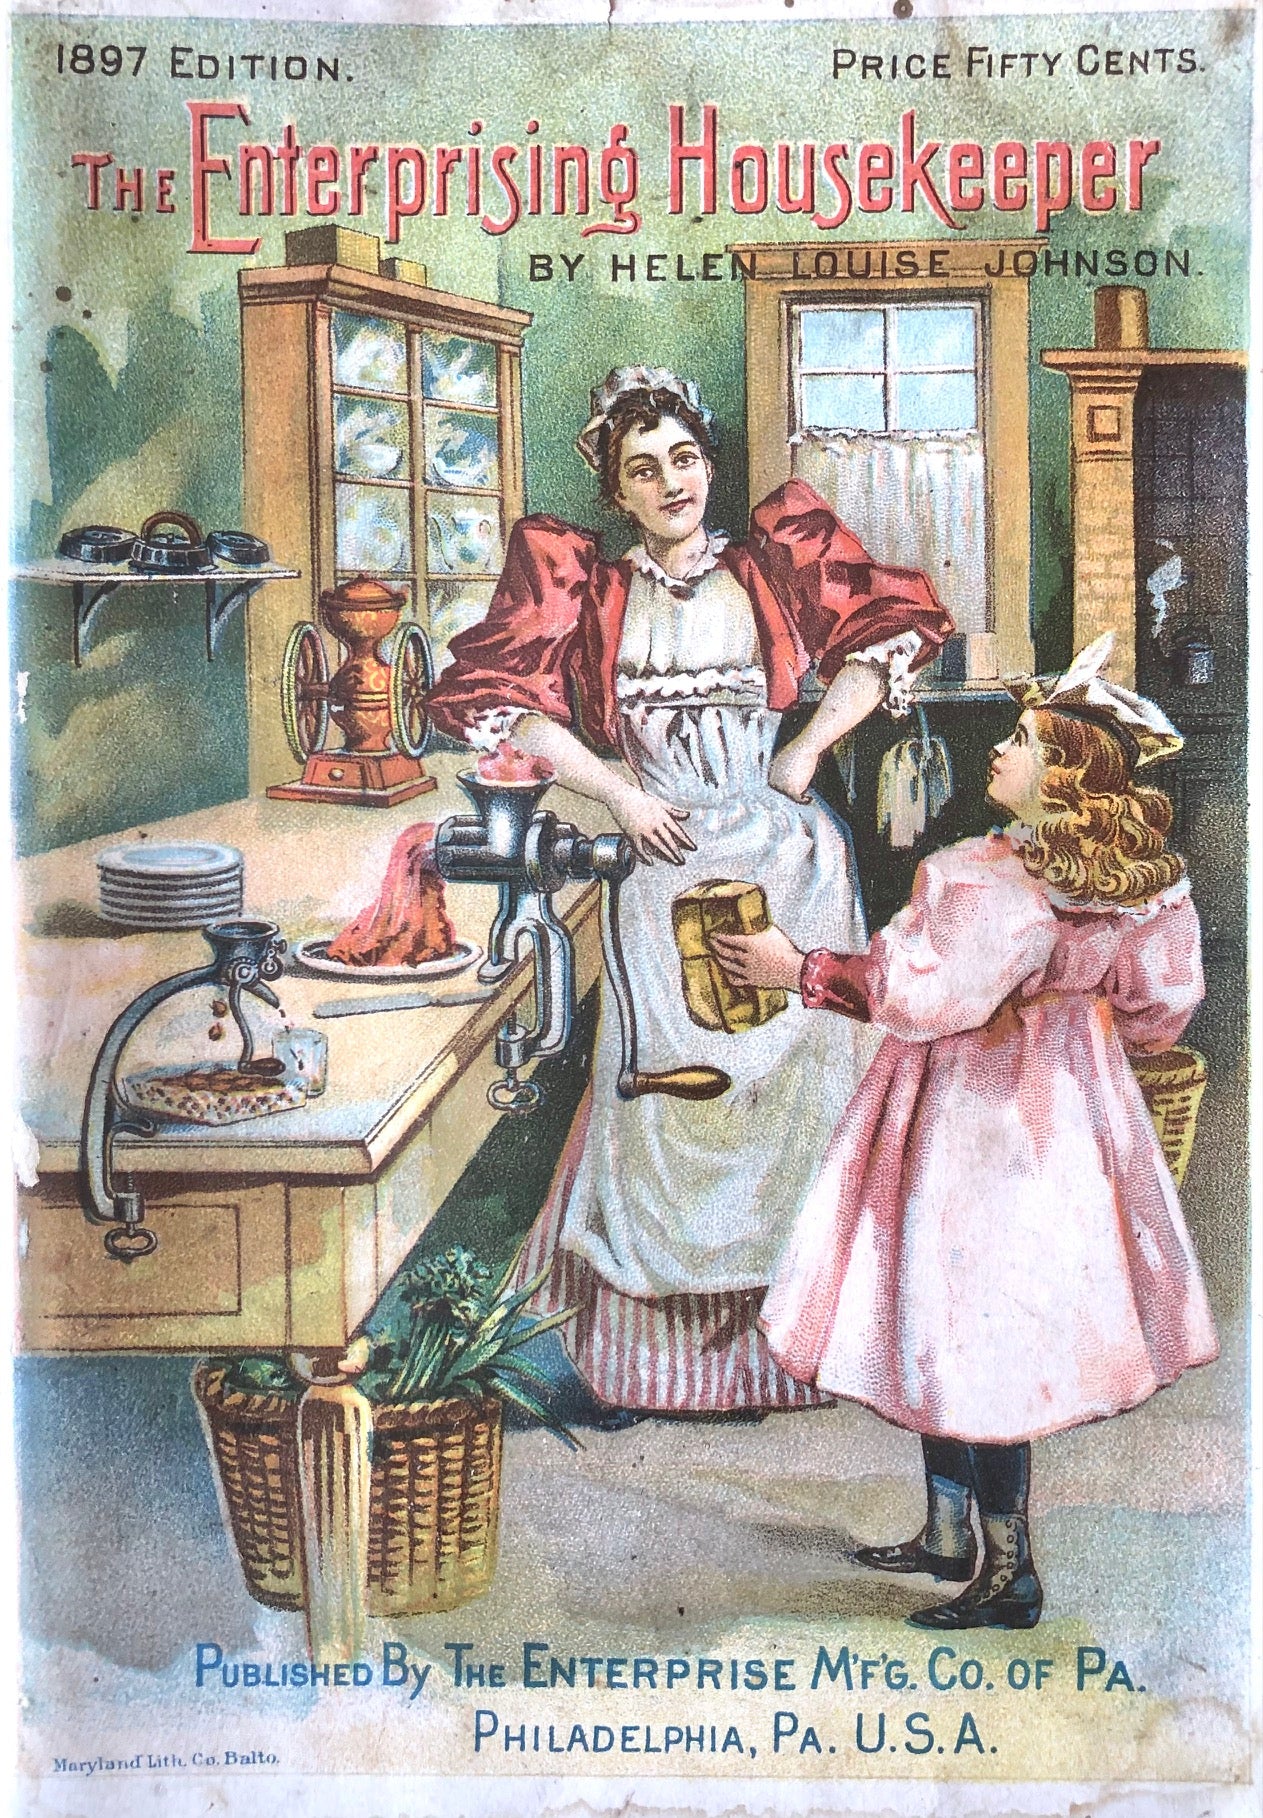 (Booklet) Helen Louise Johnson. The Enterprising Housekeeper: Suggestions for Breakfast, Luncheon and Supper.